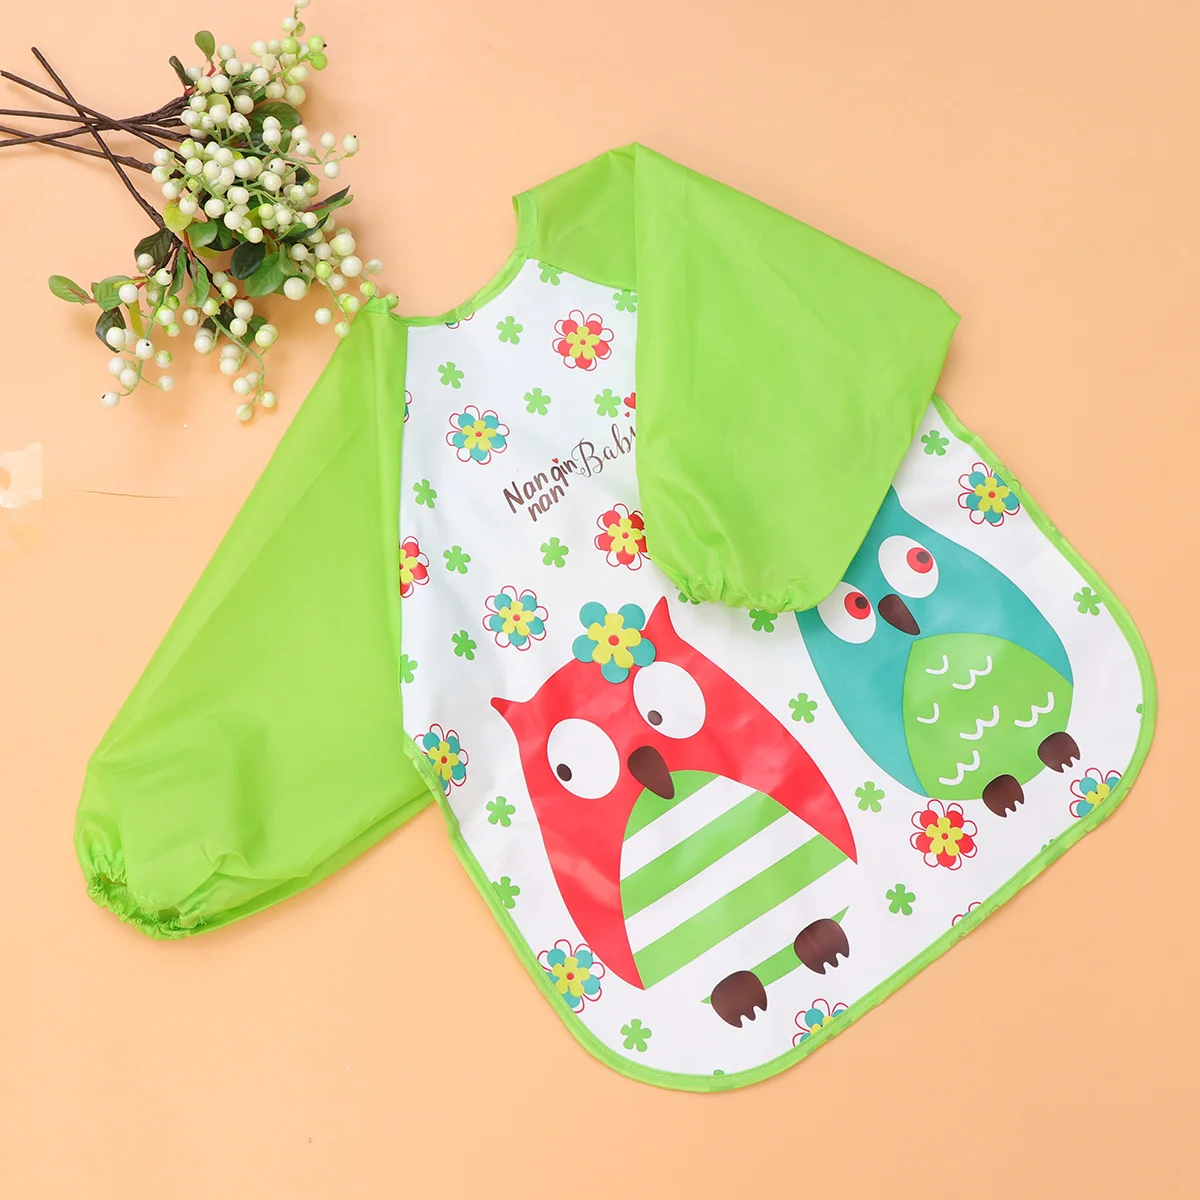 

Waterproof Childrens Smock Printed Bird Pattern Aprons with Fastener Pocket and Sleeves Artist Shirt for Eating Kids